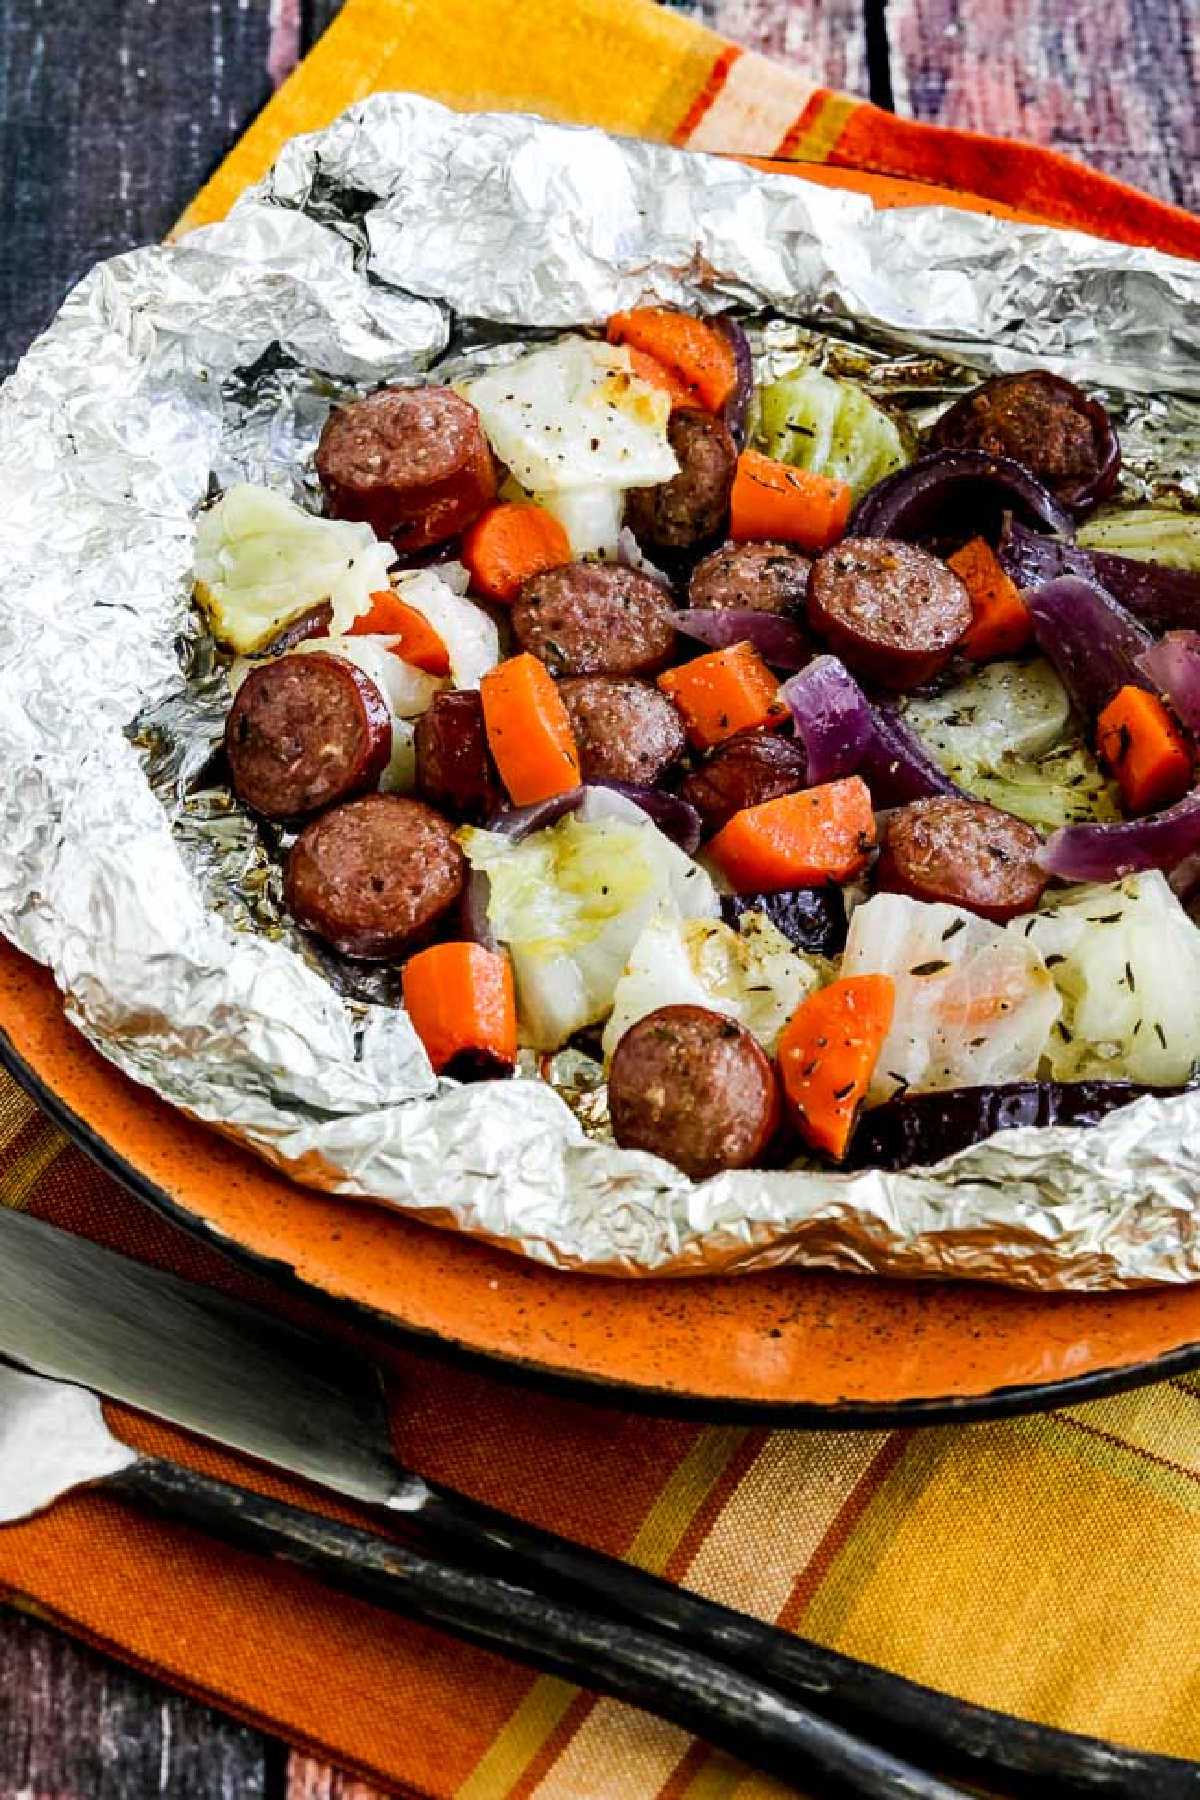 Autumn Tin Foil Dinners shown in foil on cutting board